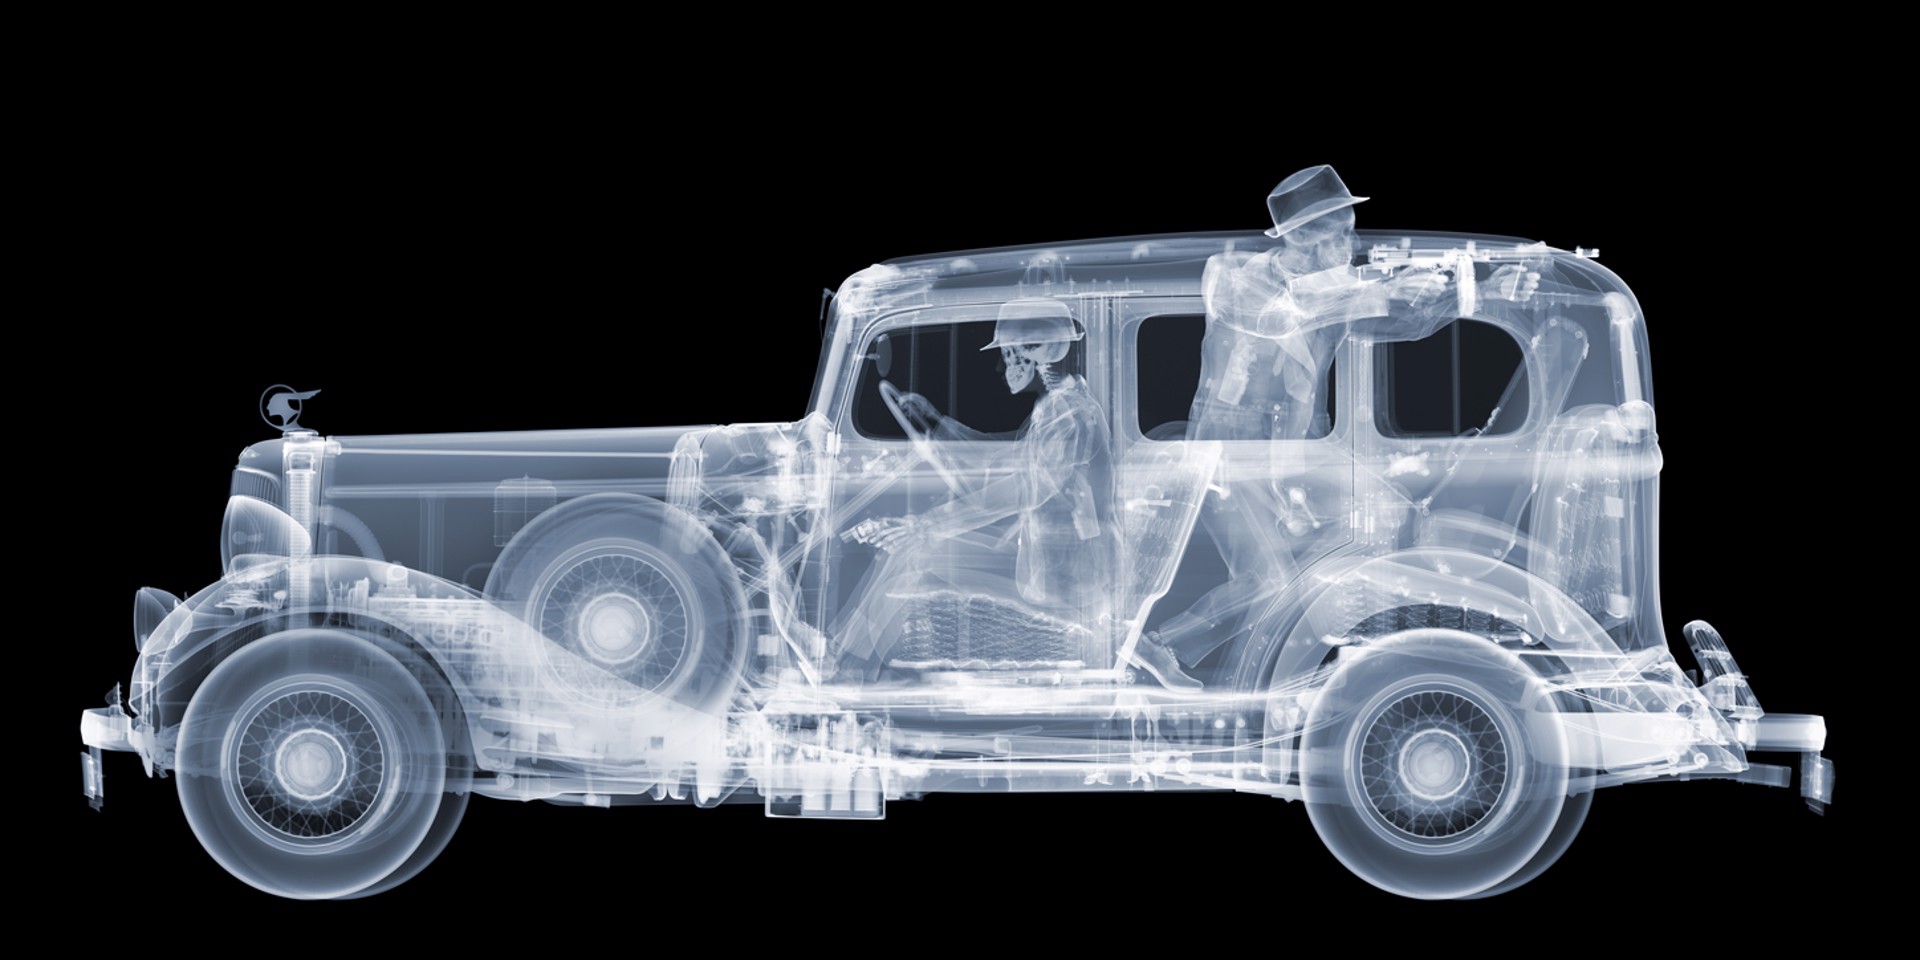 1930's Pontiac with Gangster by Nick Veasey